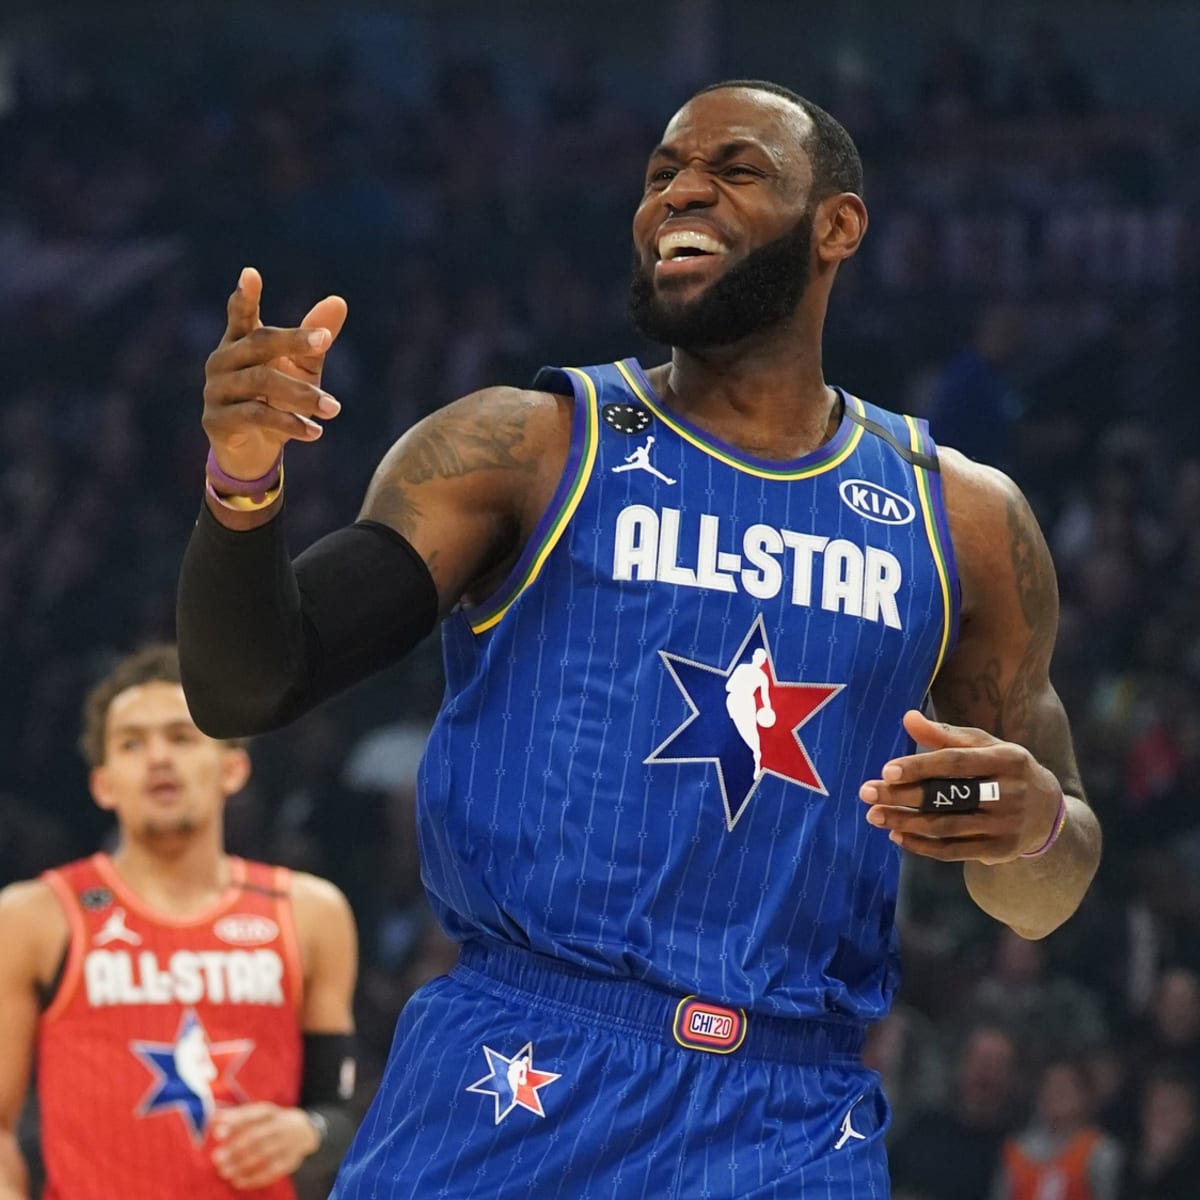 LeBron James - 2020 NBA All-Star - Game-Worn Jersey Charity